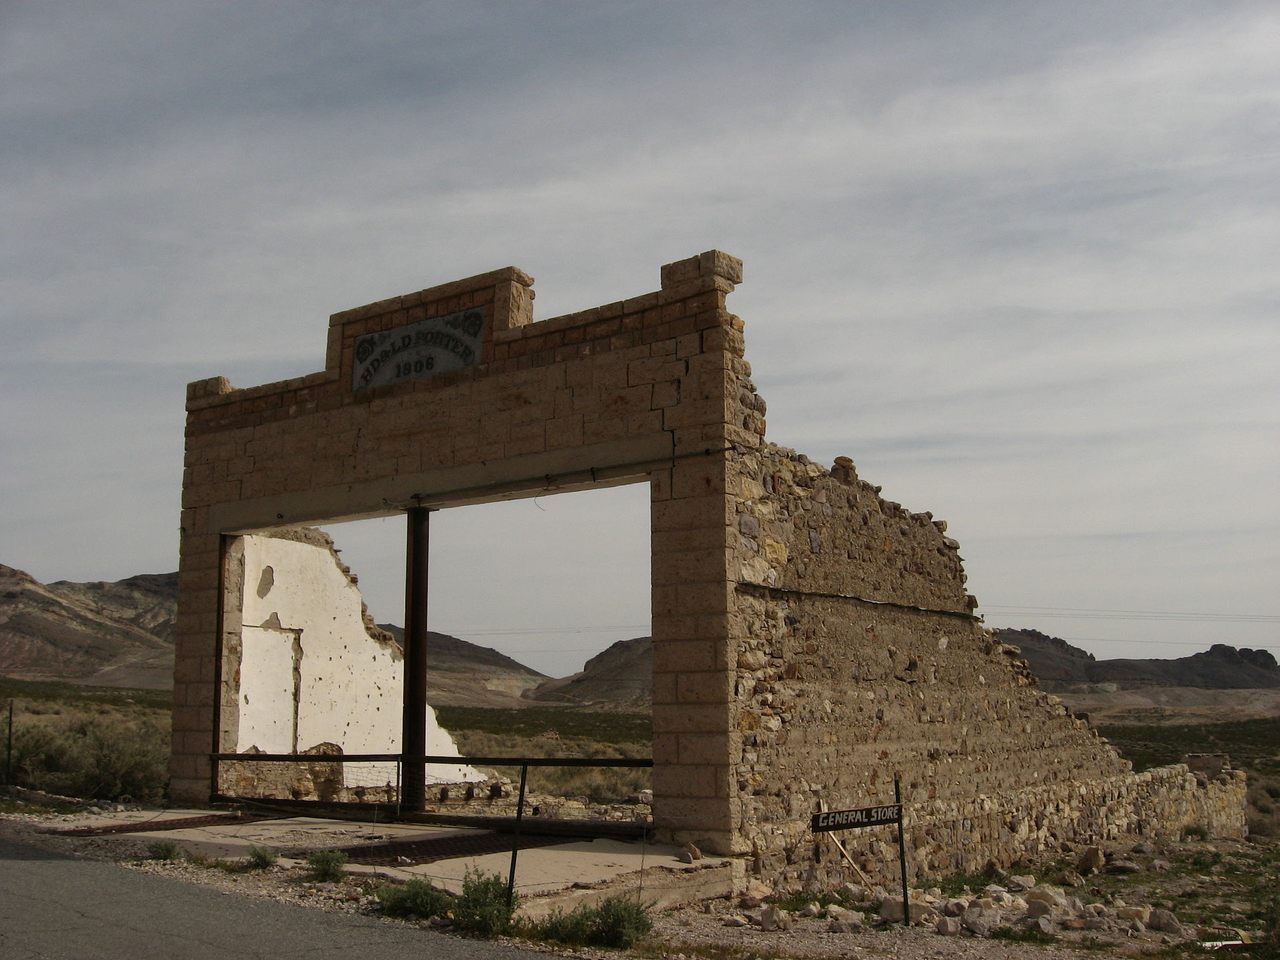 The ruins of a general store in Rhyolite, one of Nevada's better known ghost towns.